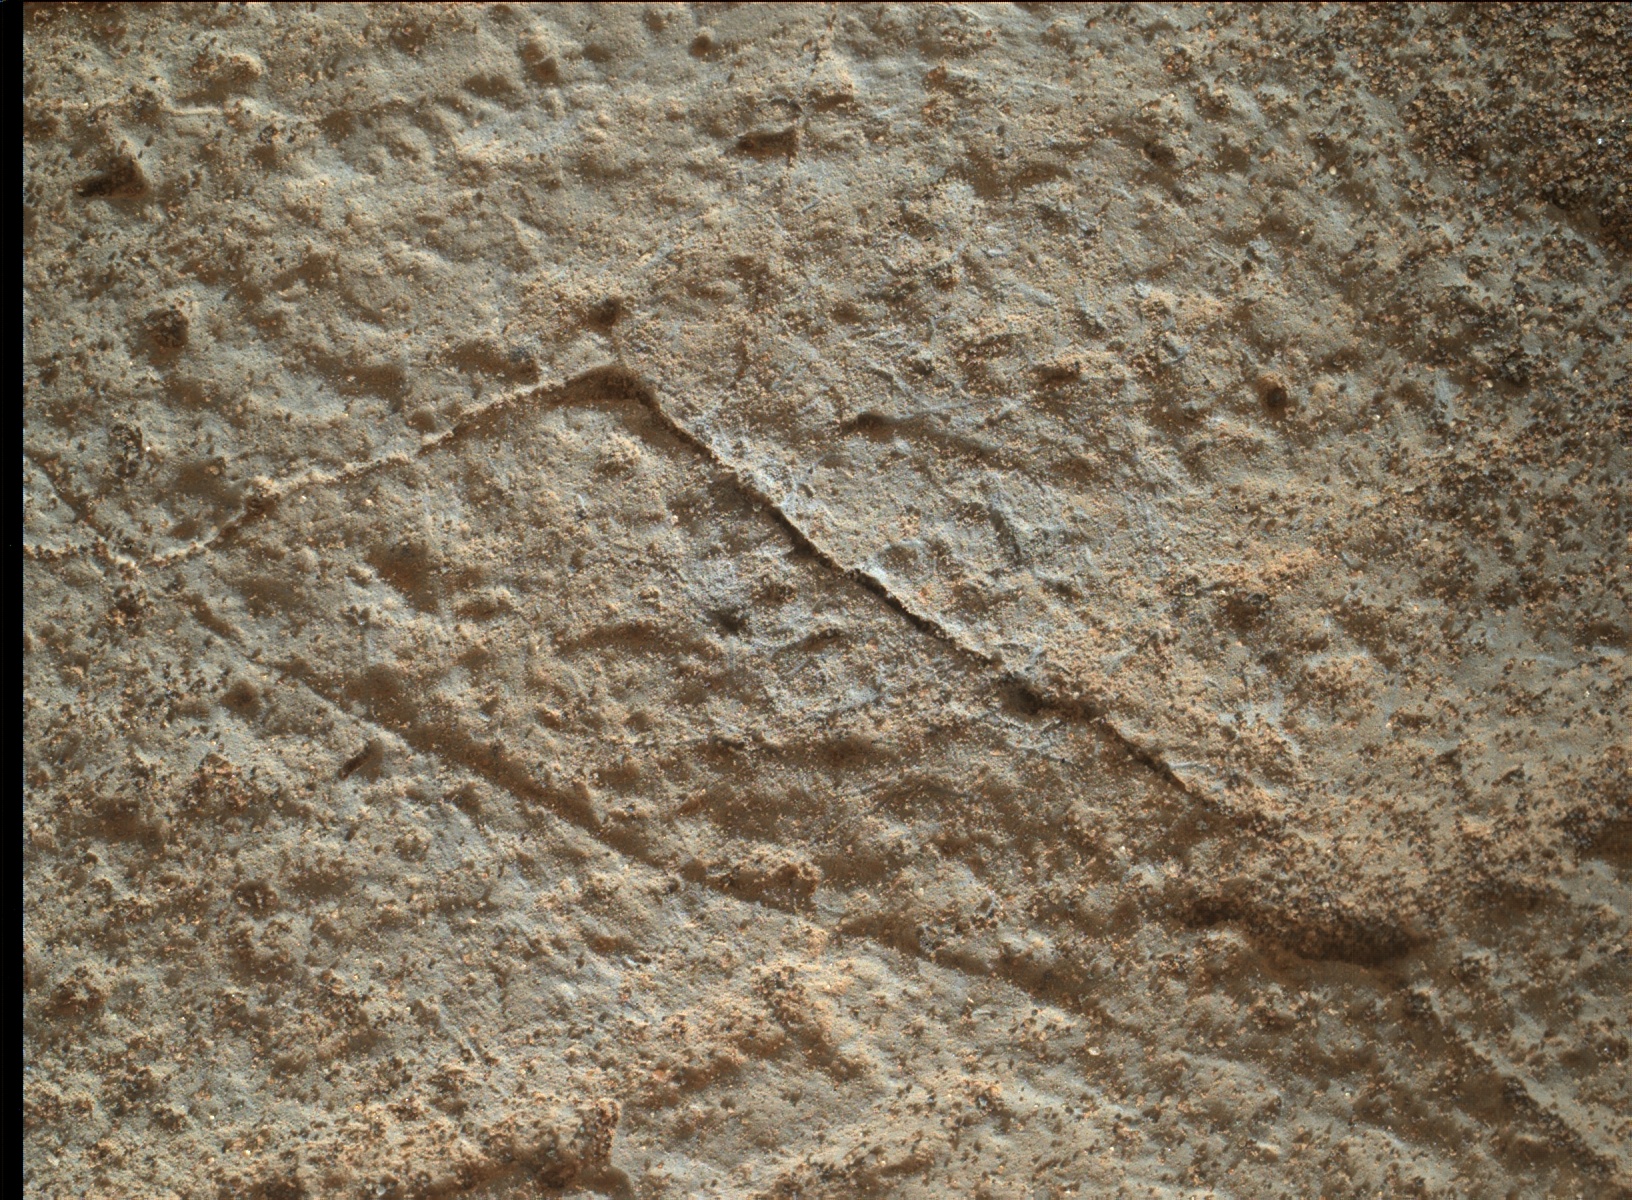 Nasa's Mars rover Curiosity acquired this image using its Mars Hand Lens Imager (MAHLI) on Sol 830